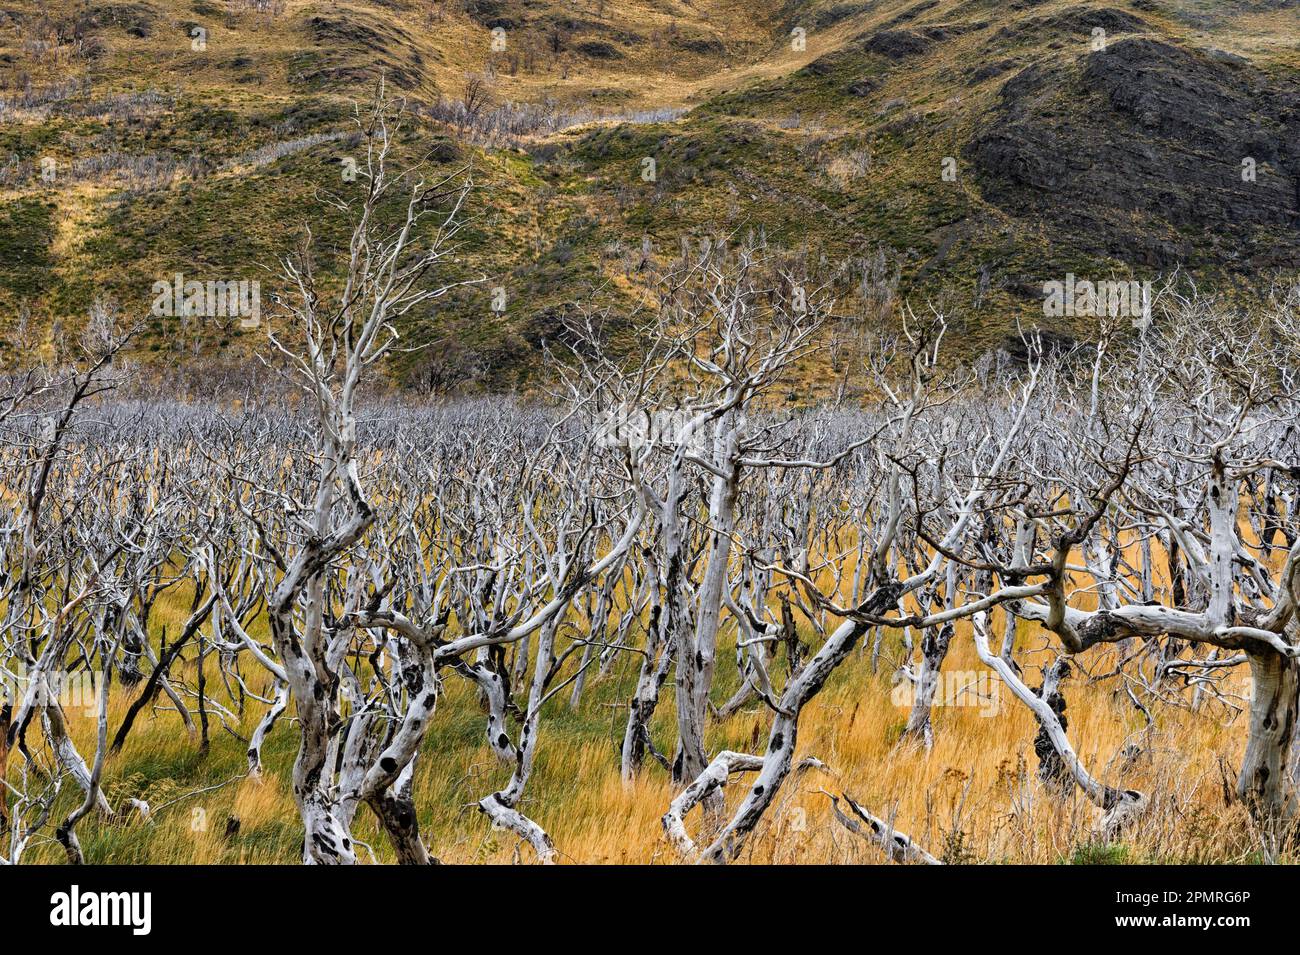 Dead trees, Torres del Paine National Park, Chilean Patagonia, Chile Stock Photo